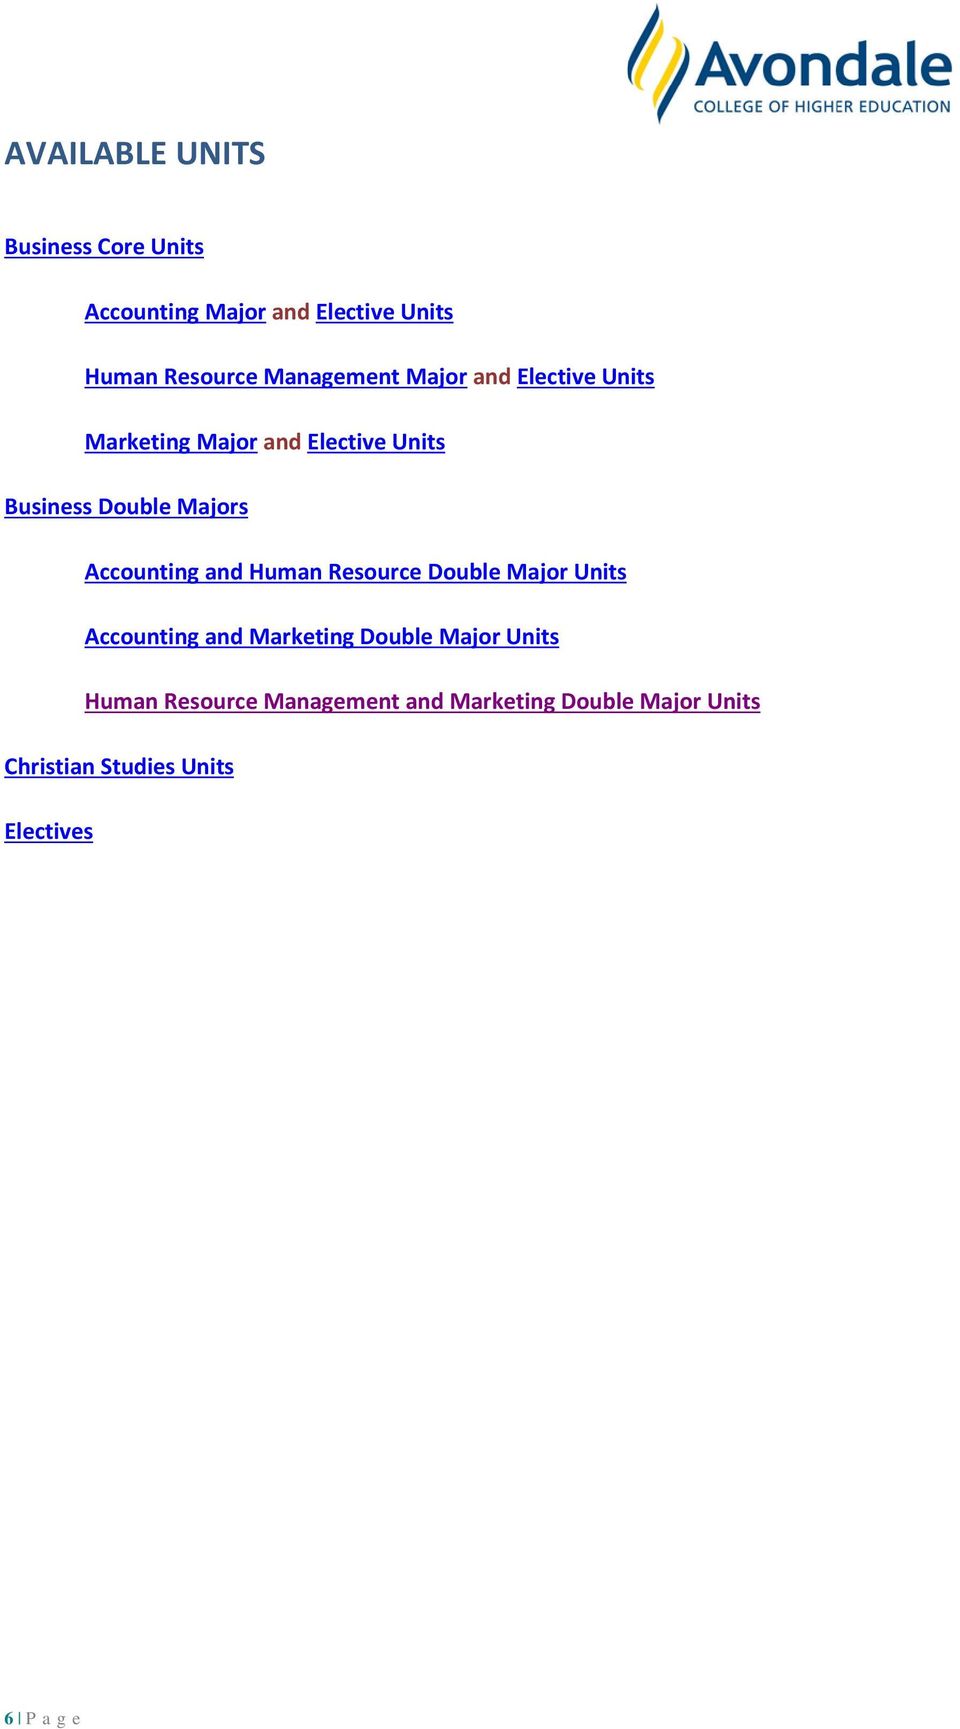 Human Resource Double Major Units and Marketing Double Major Units